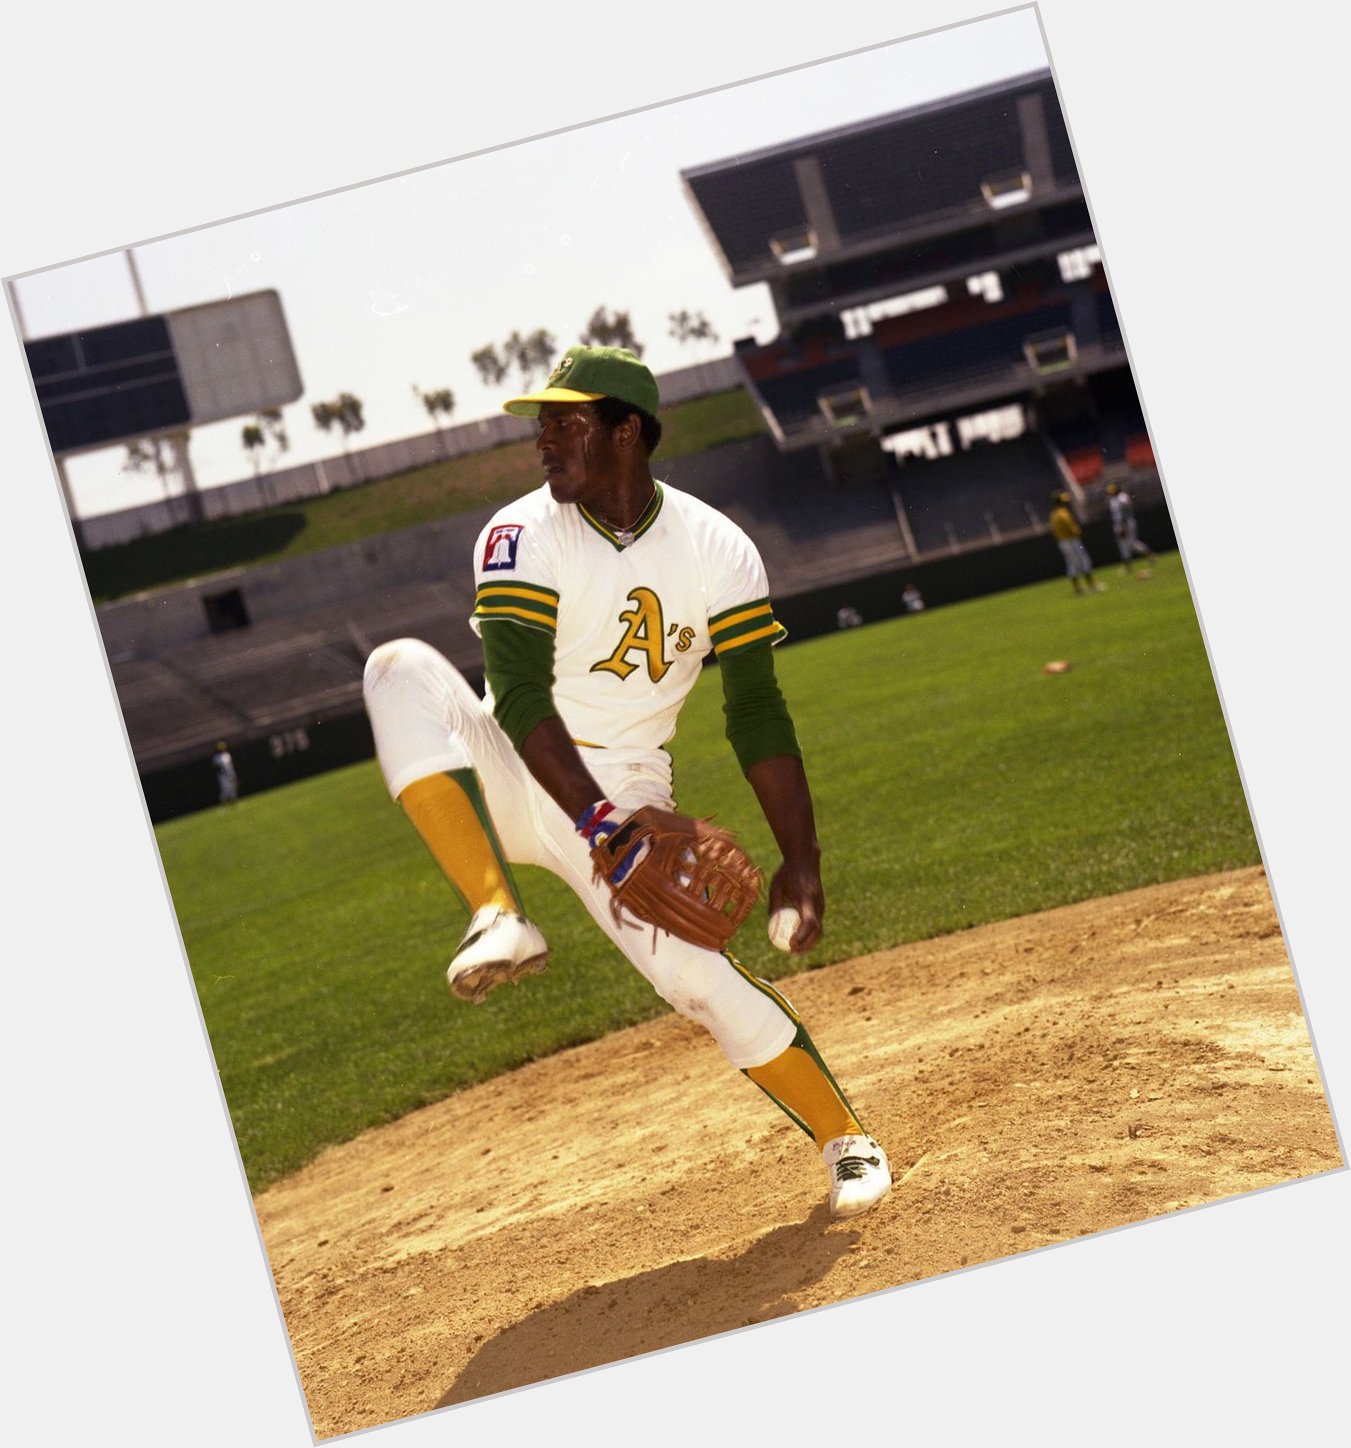 And a super Happy Birthday to Vida Blue  71 years young today 